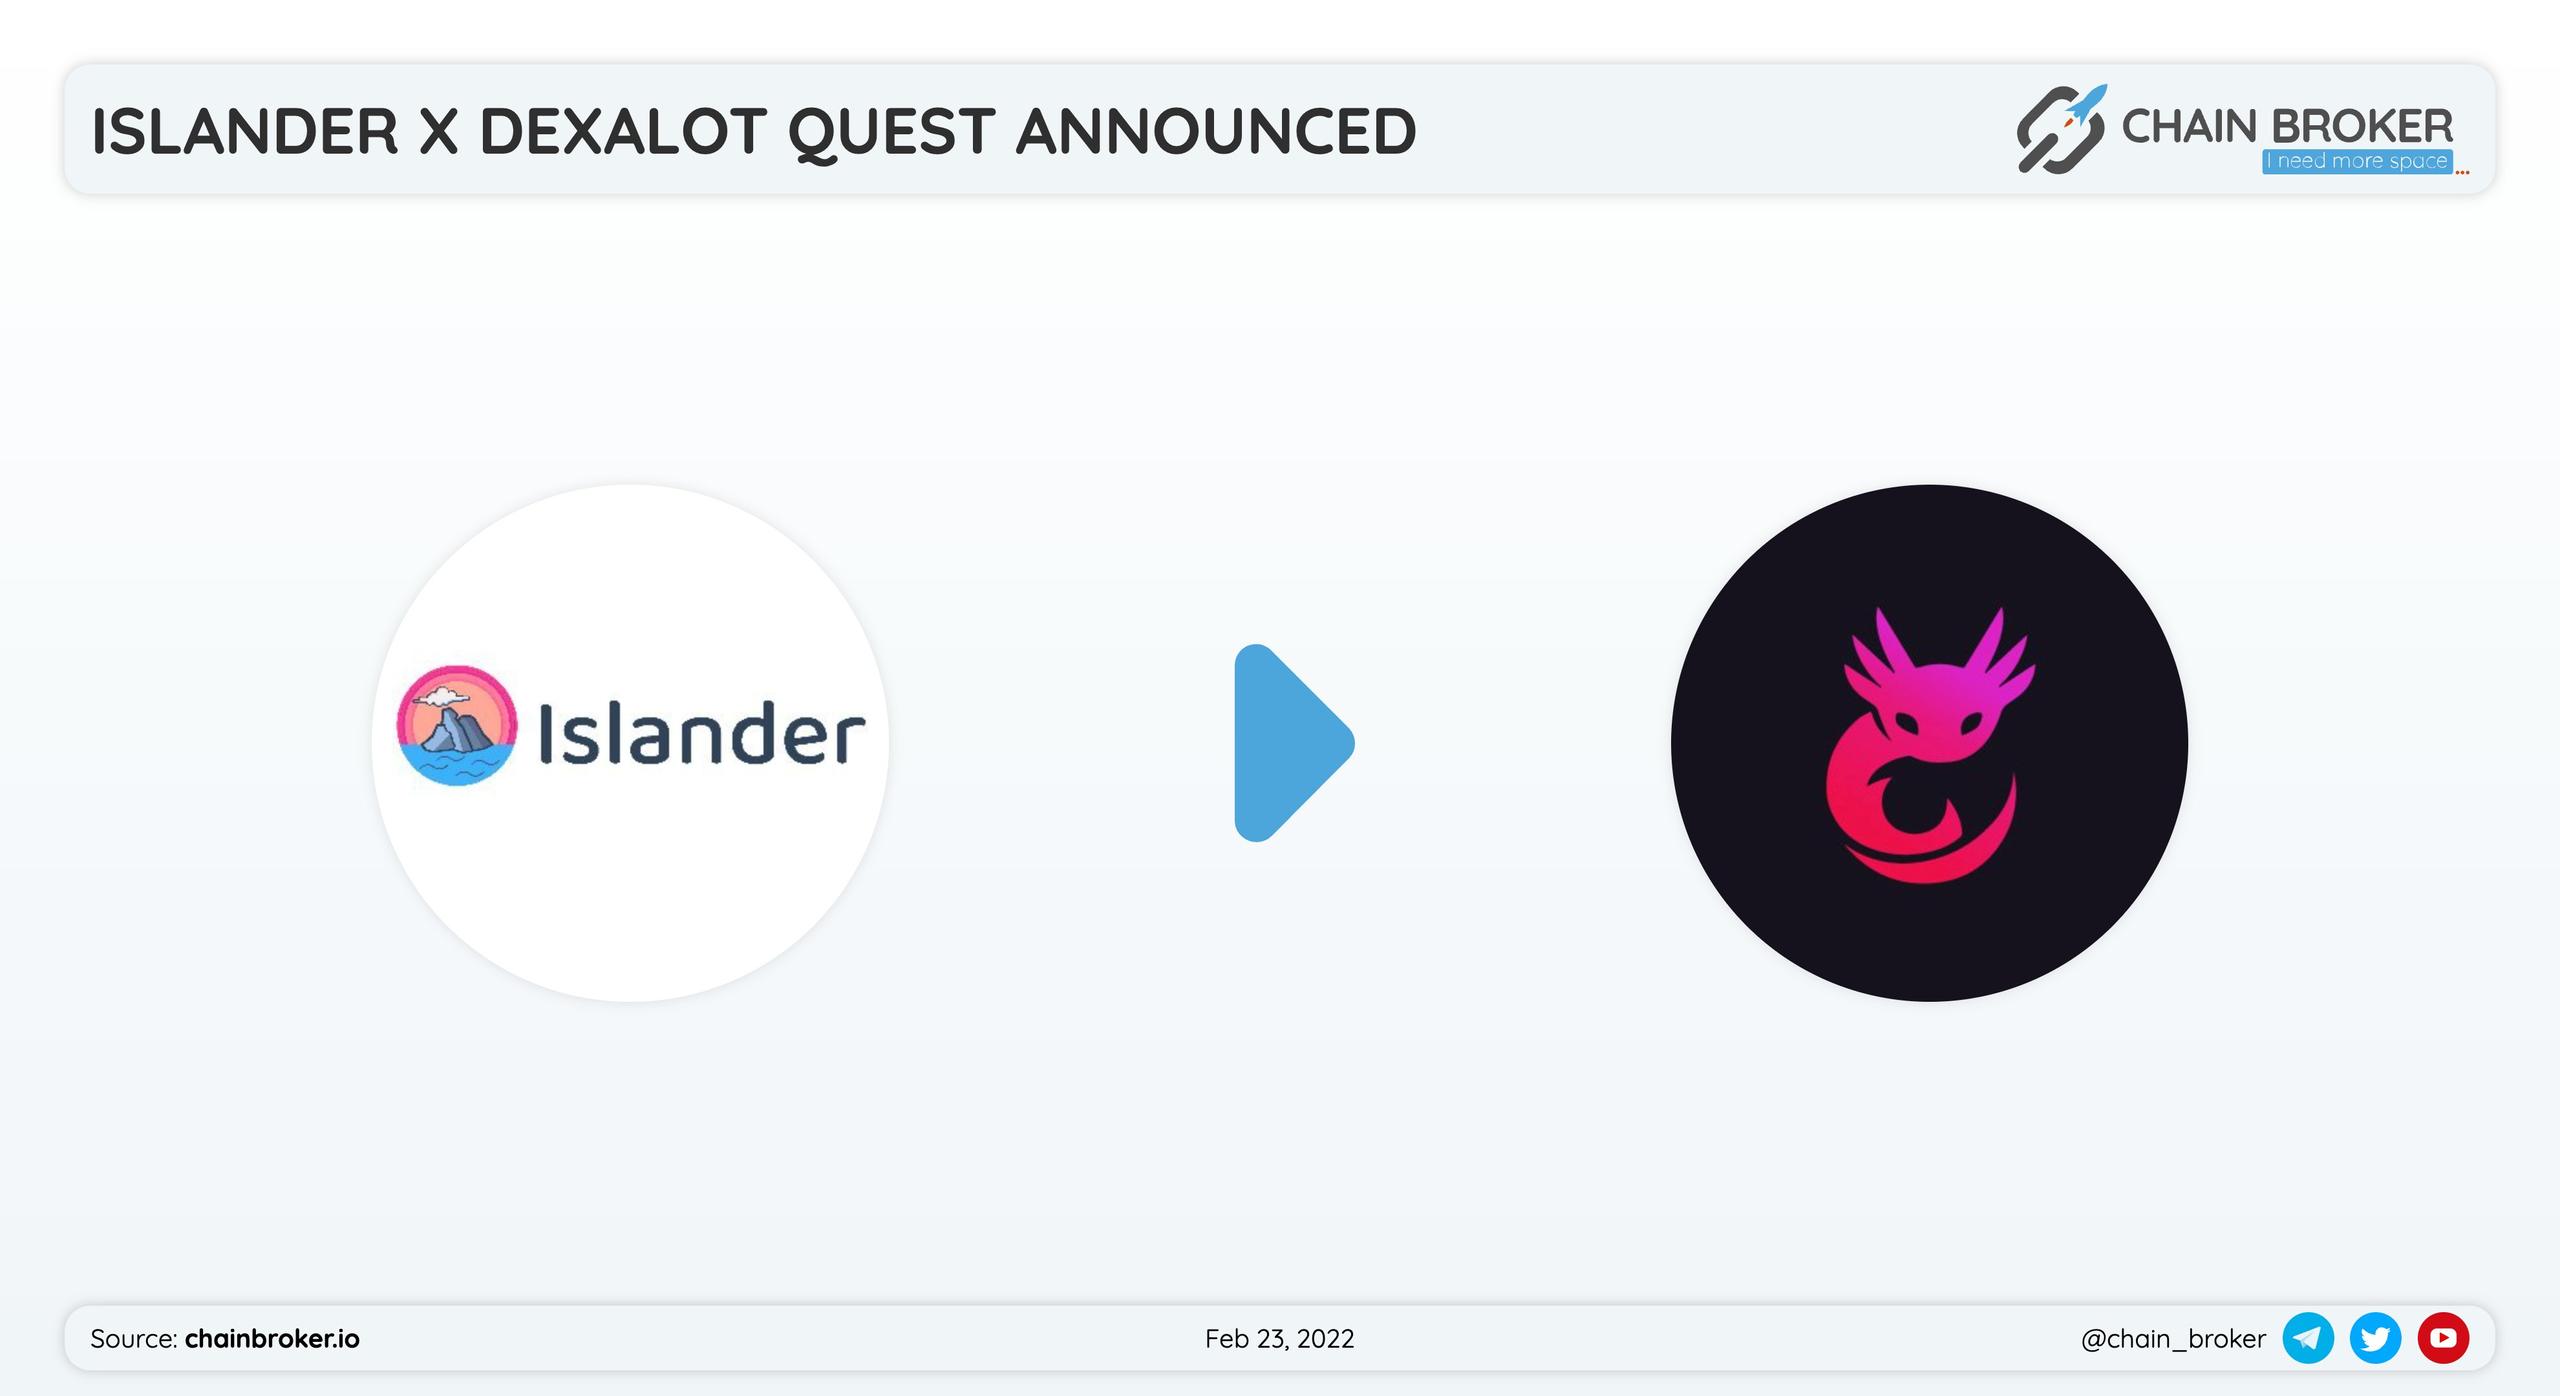 Islander has partnered with Dexalot for a learning quest.